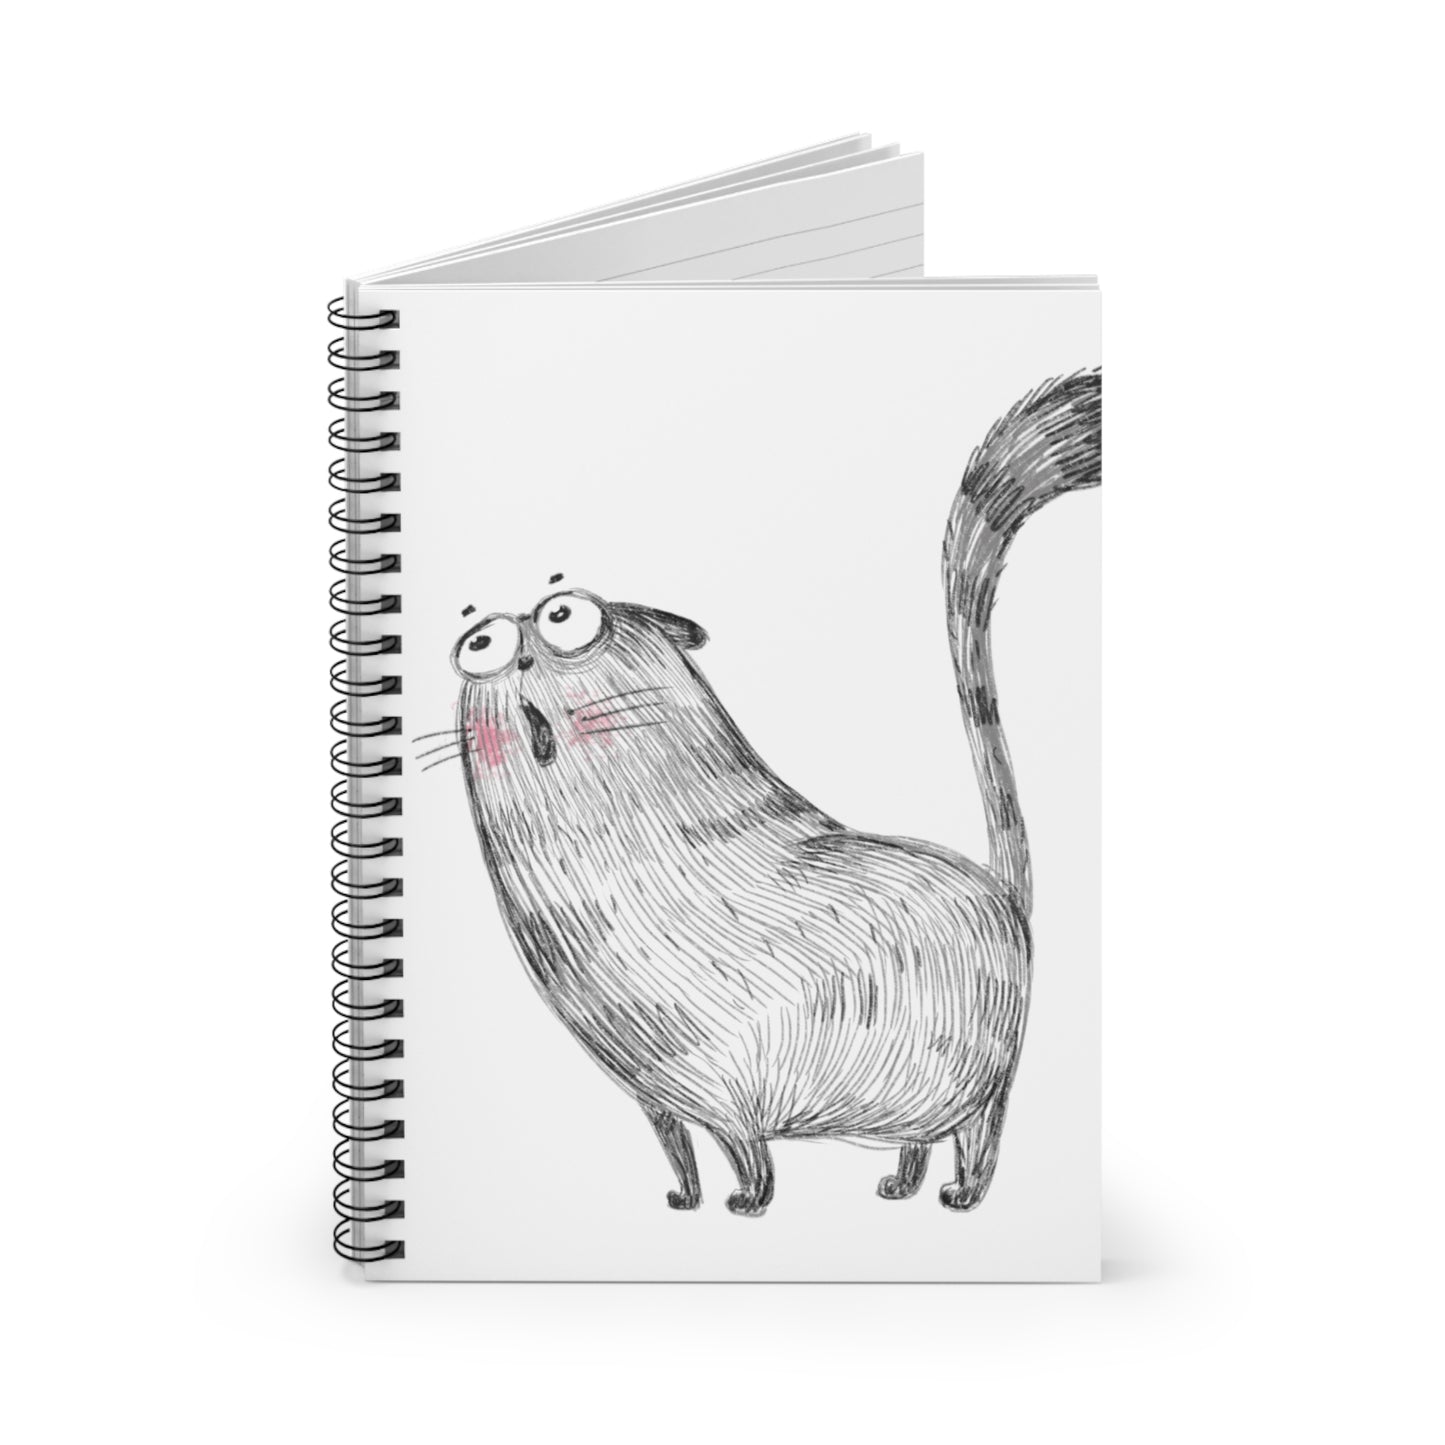 But I Don't Need to go to the Vet: Spiral Notebook - Log Books - Journals - Diaries - and More Custom Printed by TheGlassyLass